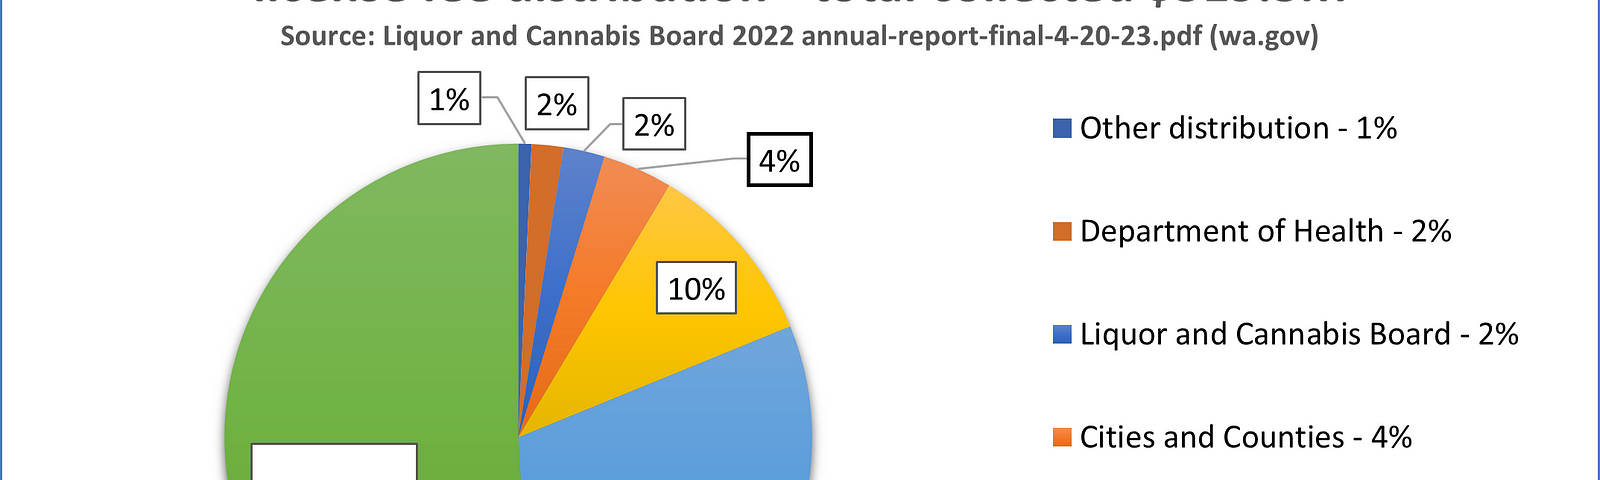 Pie chart showing the breakdown of cannabis excise tax and license fee distribution for fiscal year 2022